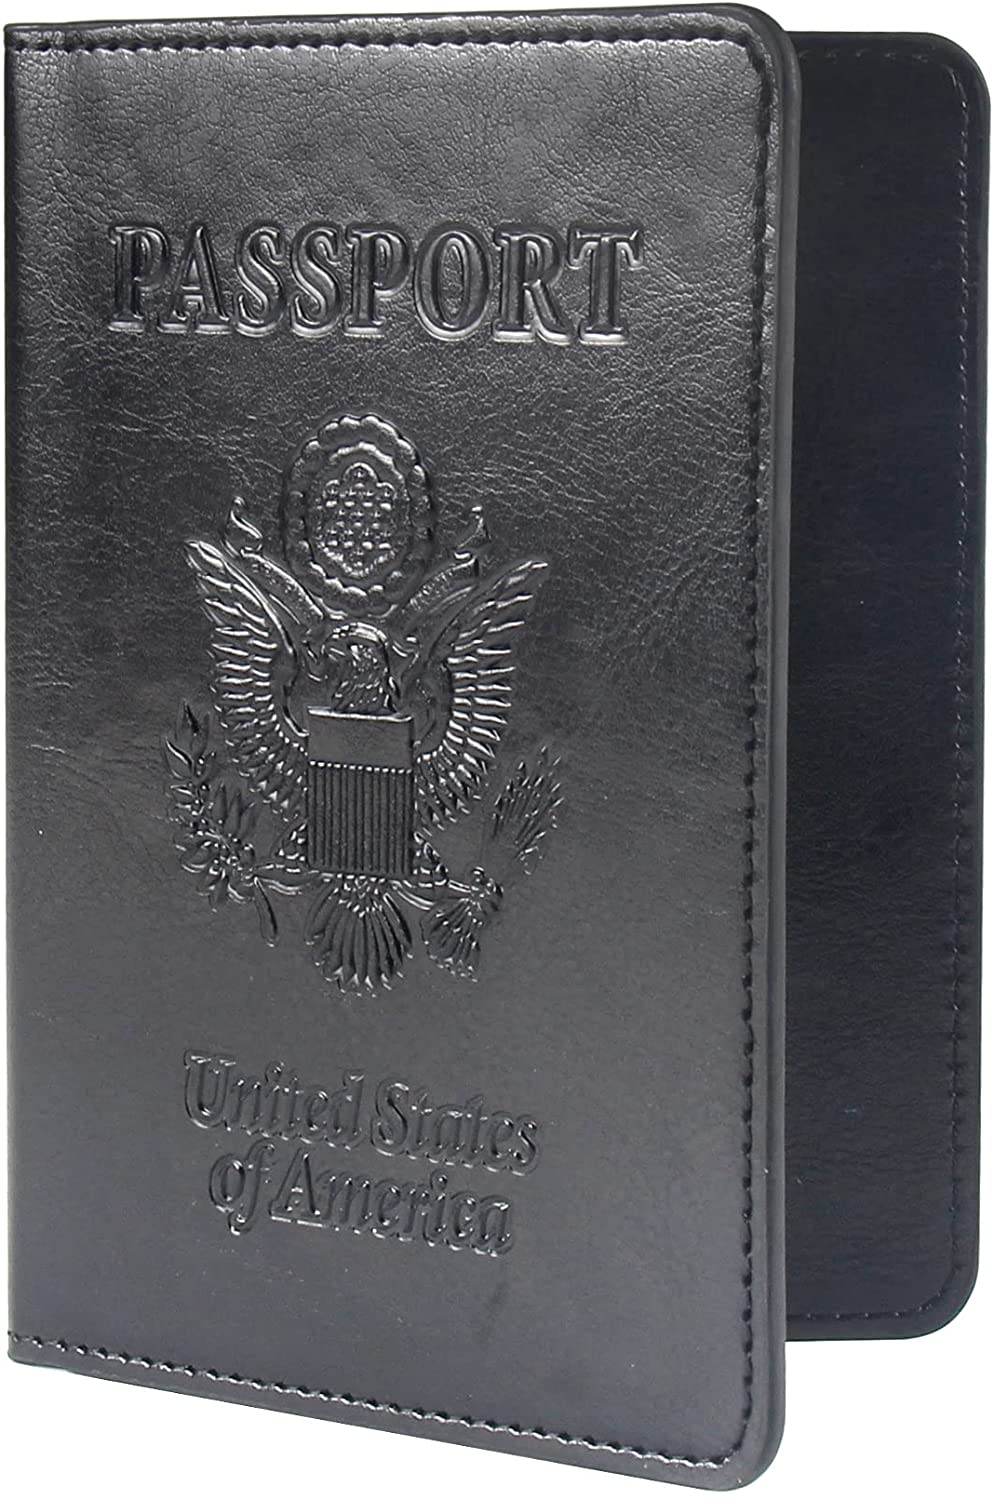 Passport and Vaccine Card Holder Combo, Passport Holder with Vaccine Card Slot, PU Leather Passport Cover and Vaccine Card Protector